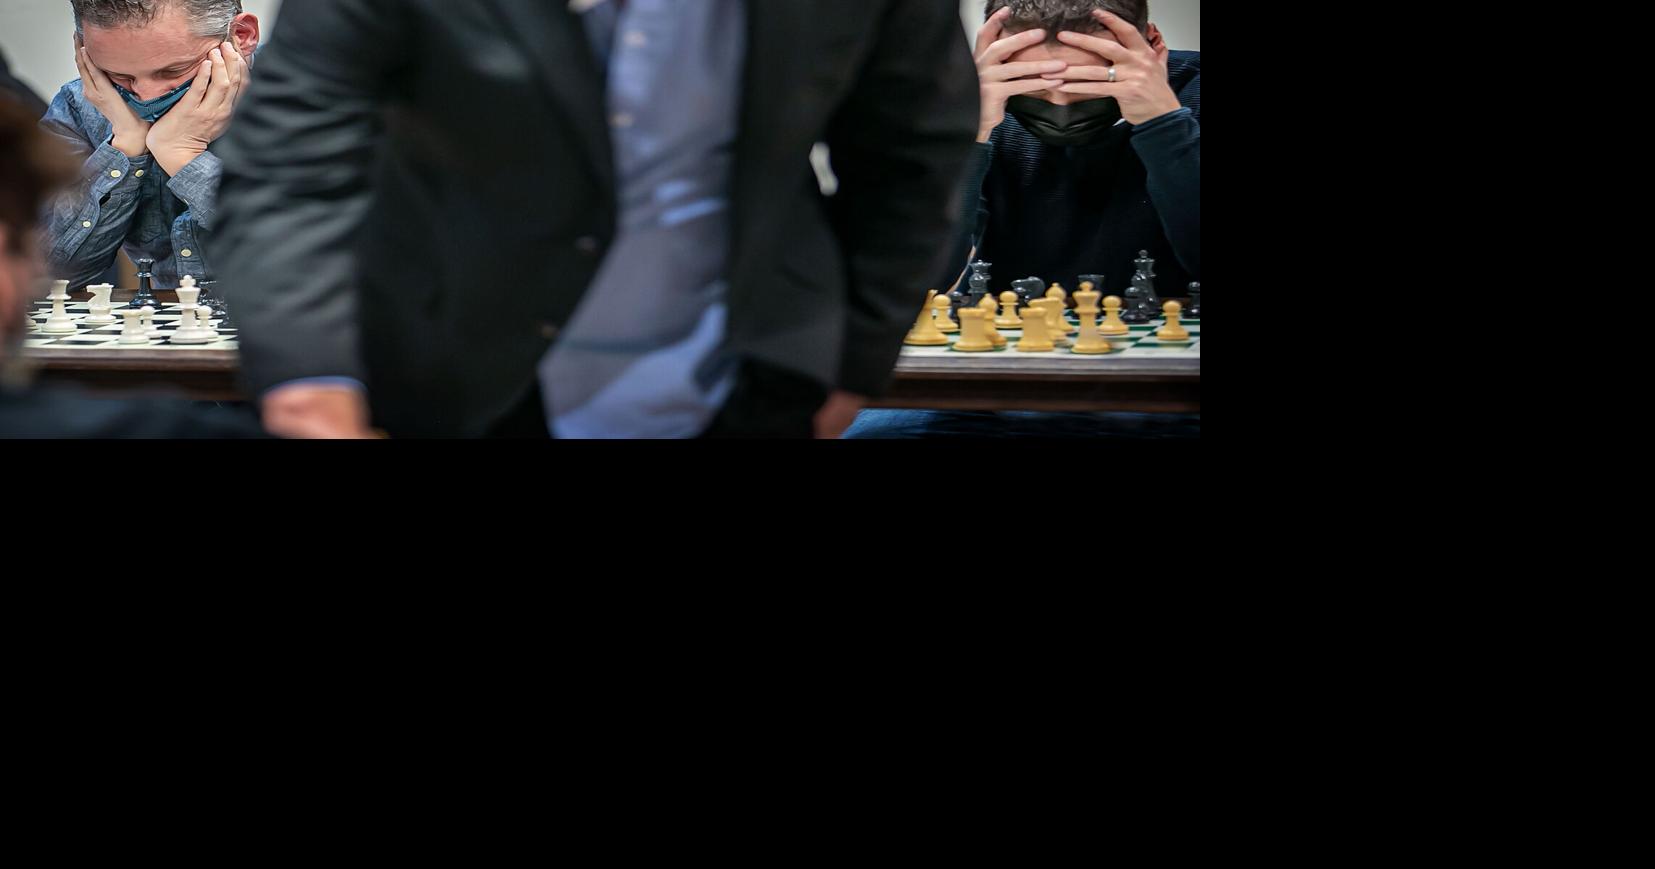 Wesley So on verge of ruling US Chess Championship